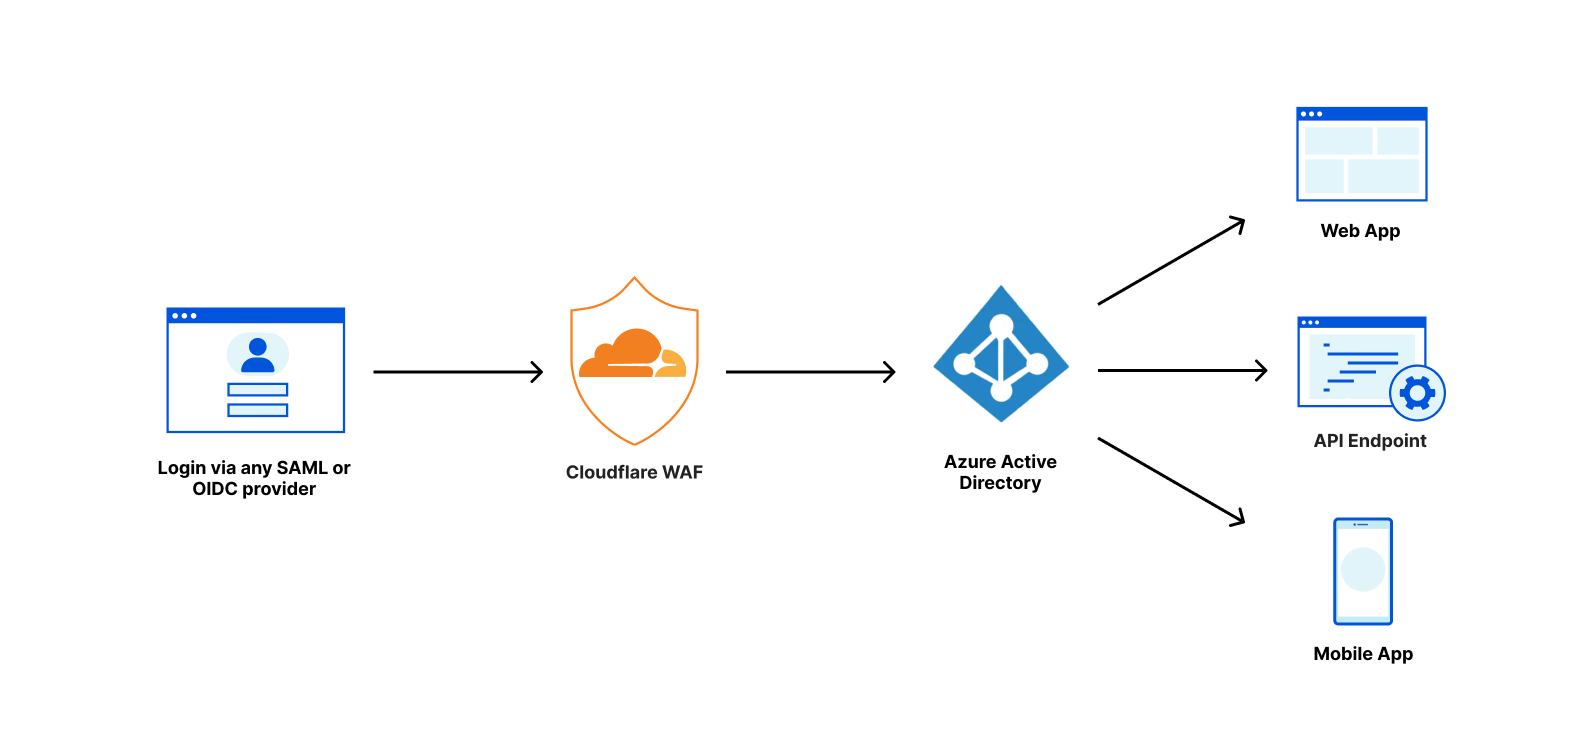 Enable secure access to applications with Cloudflare WAF and Azure Active Directory